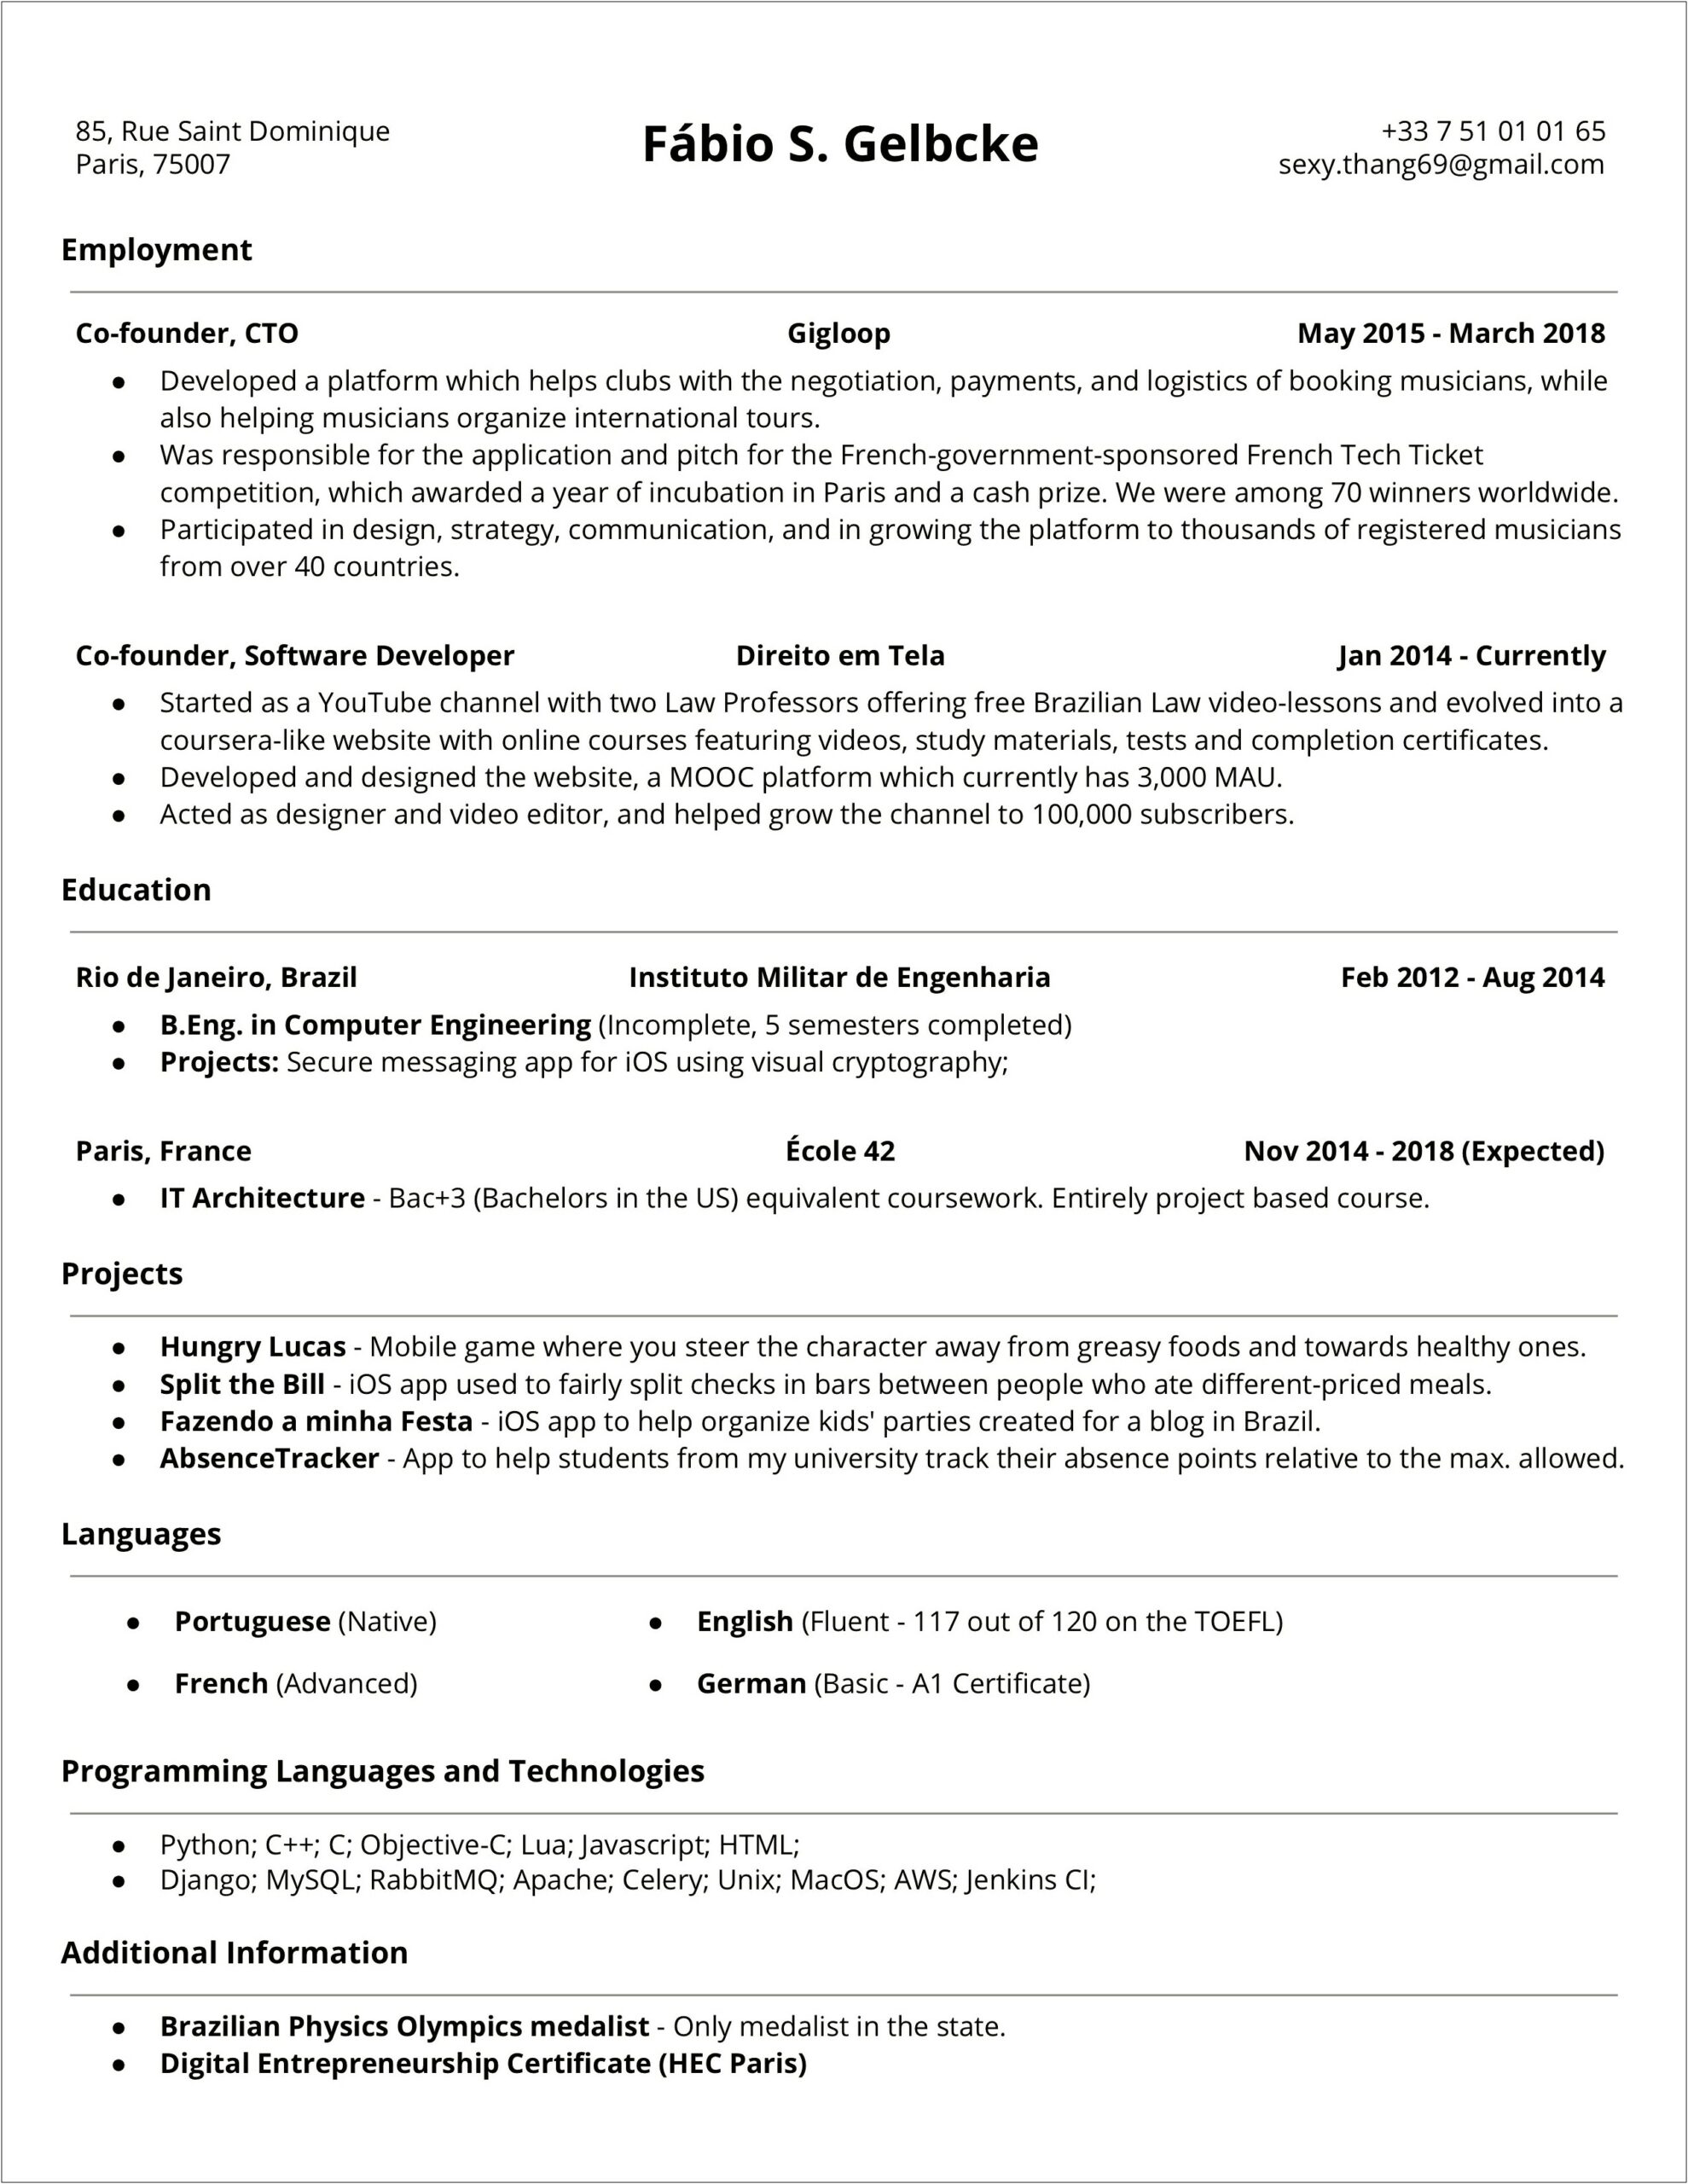 Resume Is Good But No Interviews